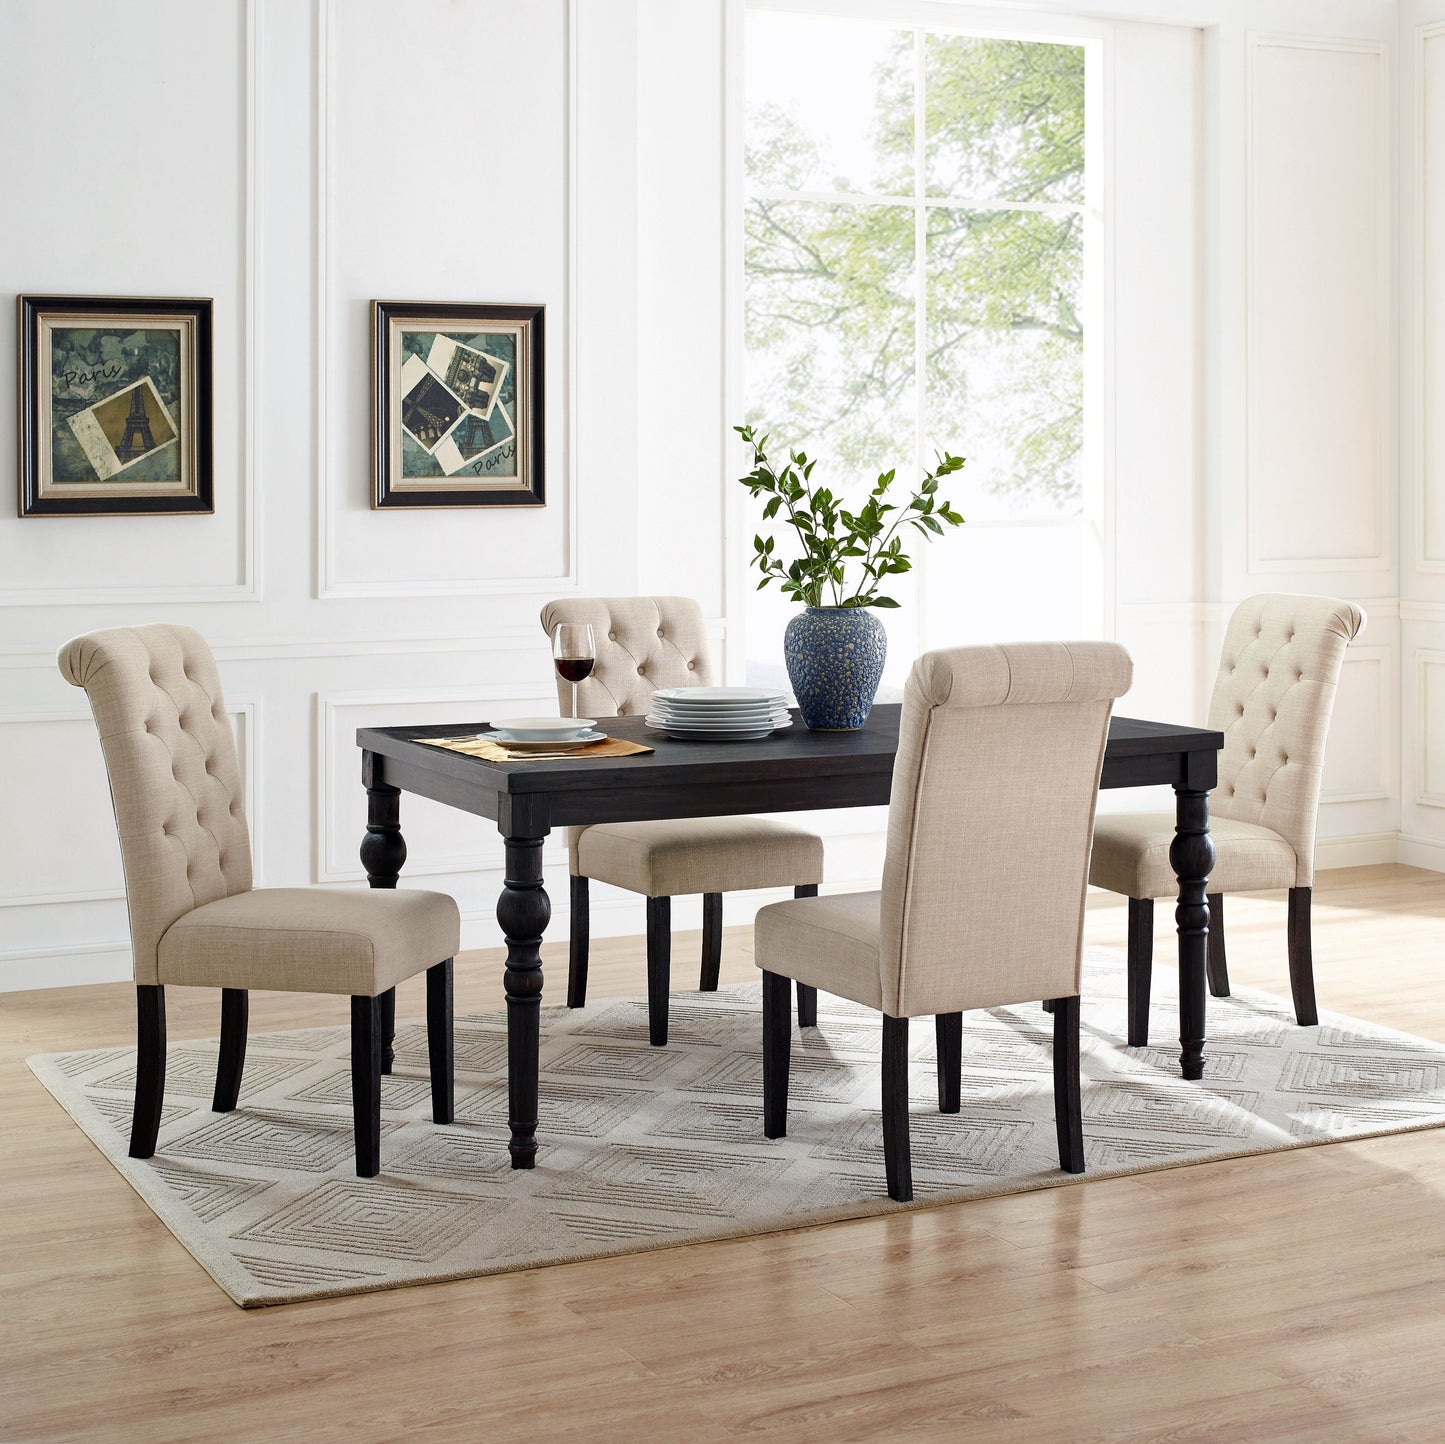 Leviton Urban Style Wood Dark Wash Turned-Leg Dining Set: Table and 4 Chairs, Tan